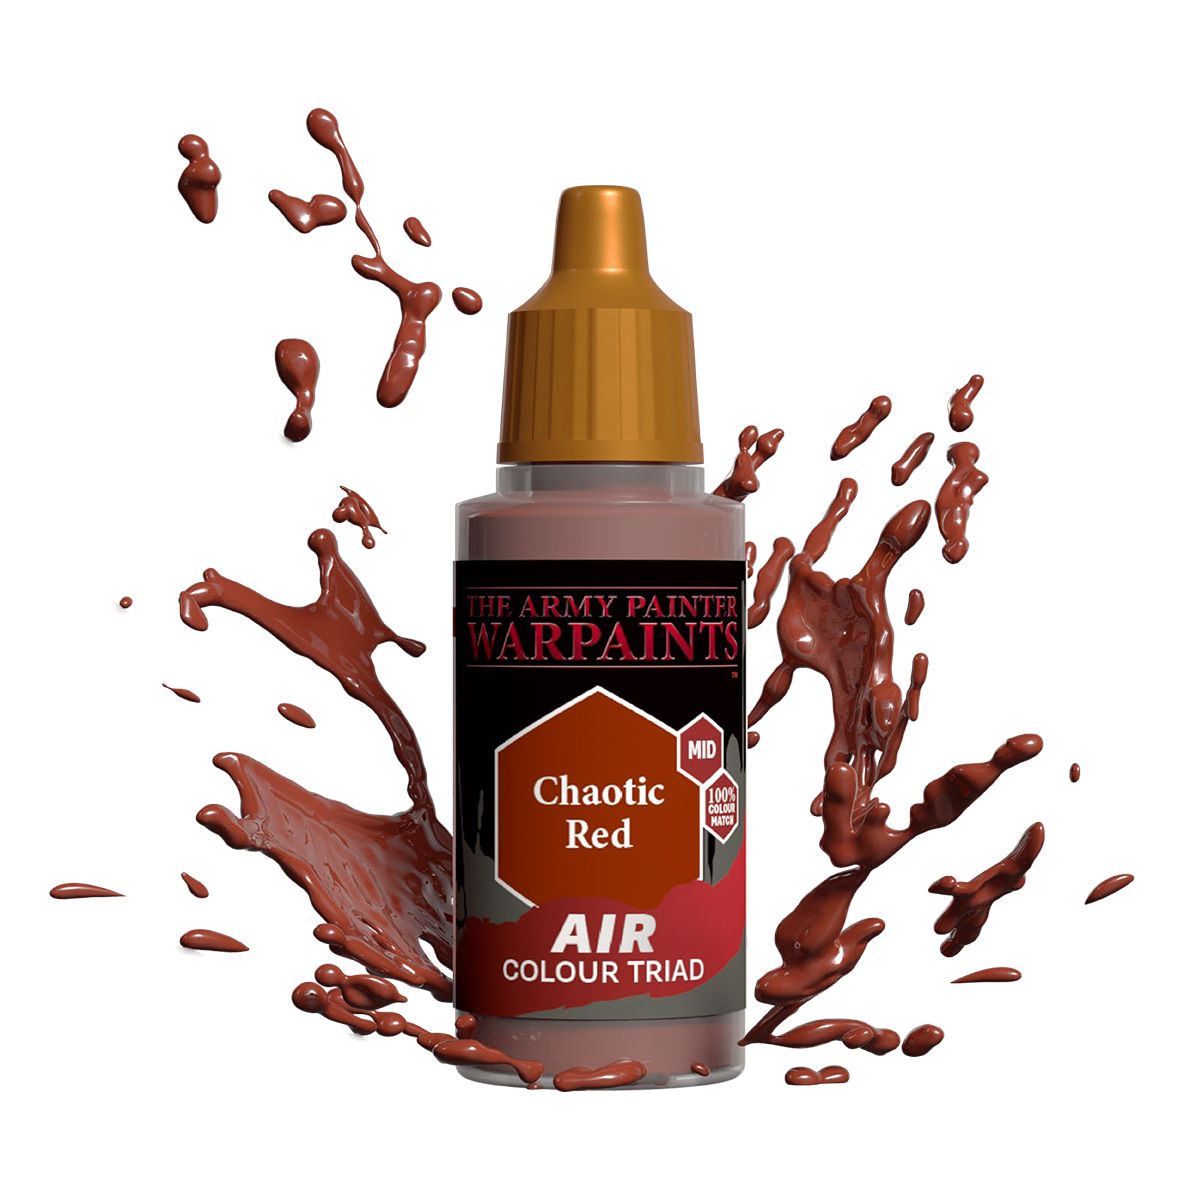 Army Painter Warpaints - Air Chaotic Red Acrylic Paint 18ml